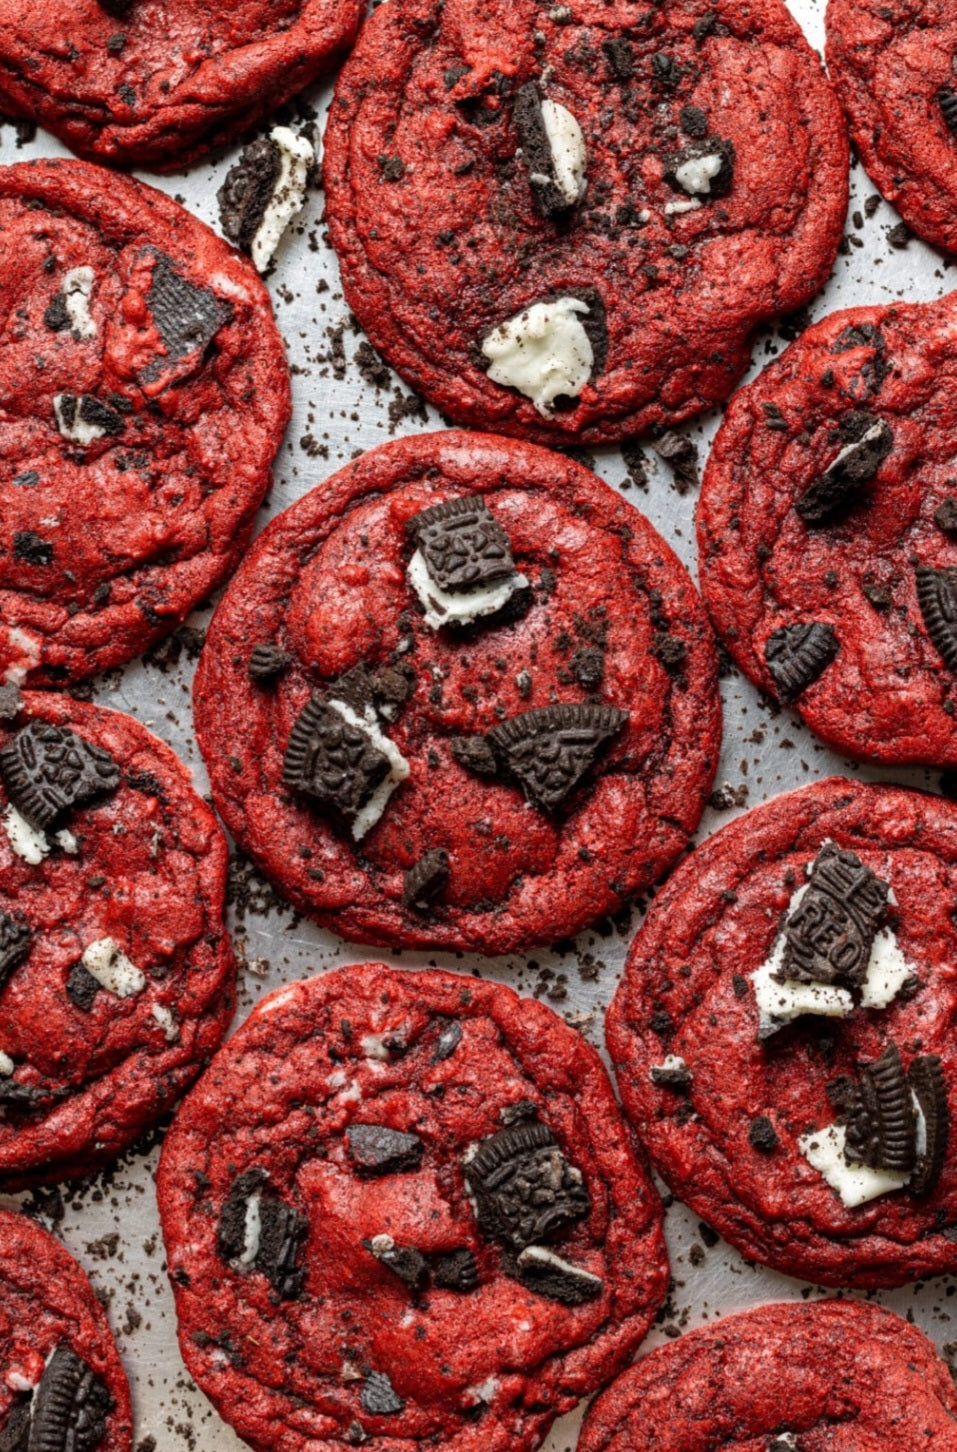 Red Velvet Cookies-N-Cream Baking Class Friday May 31st. 7pm-9pm.